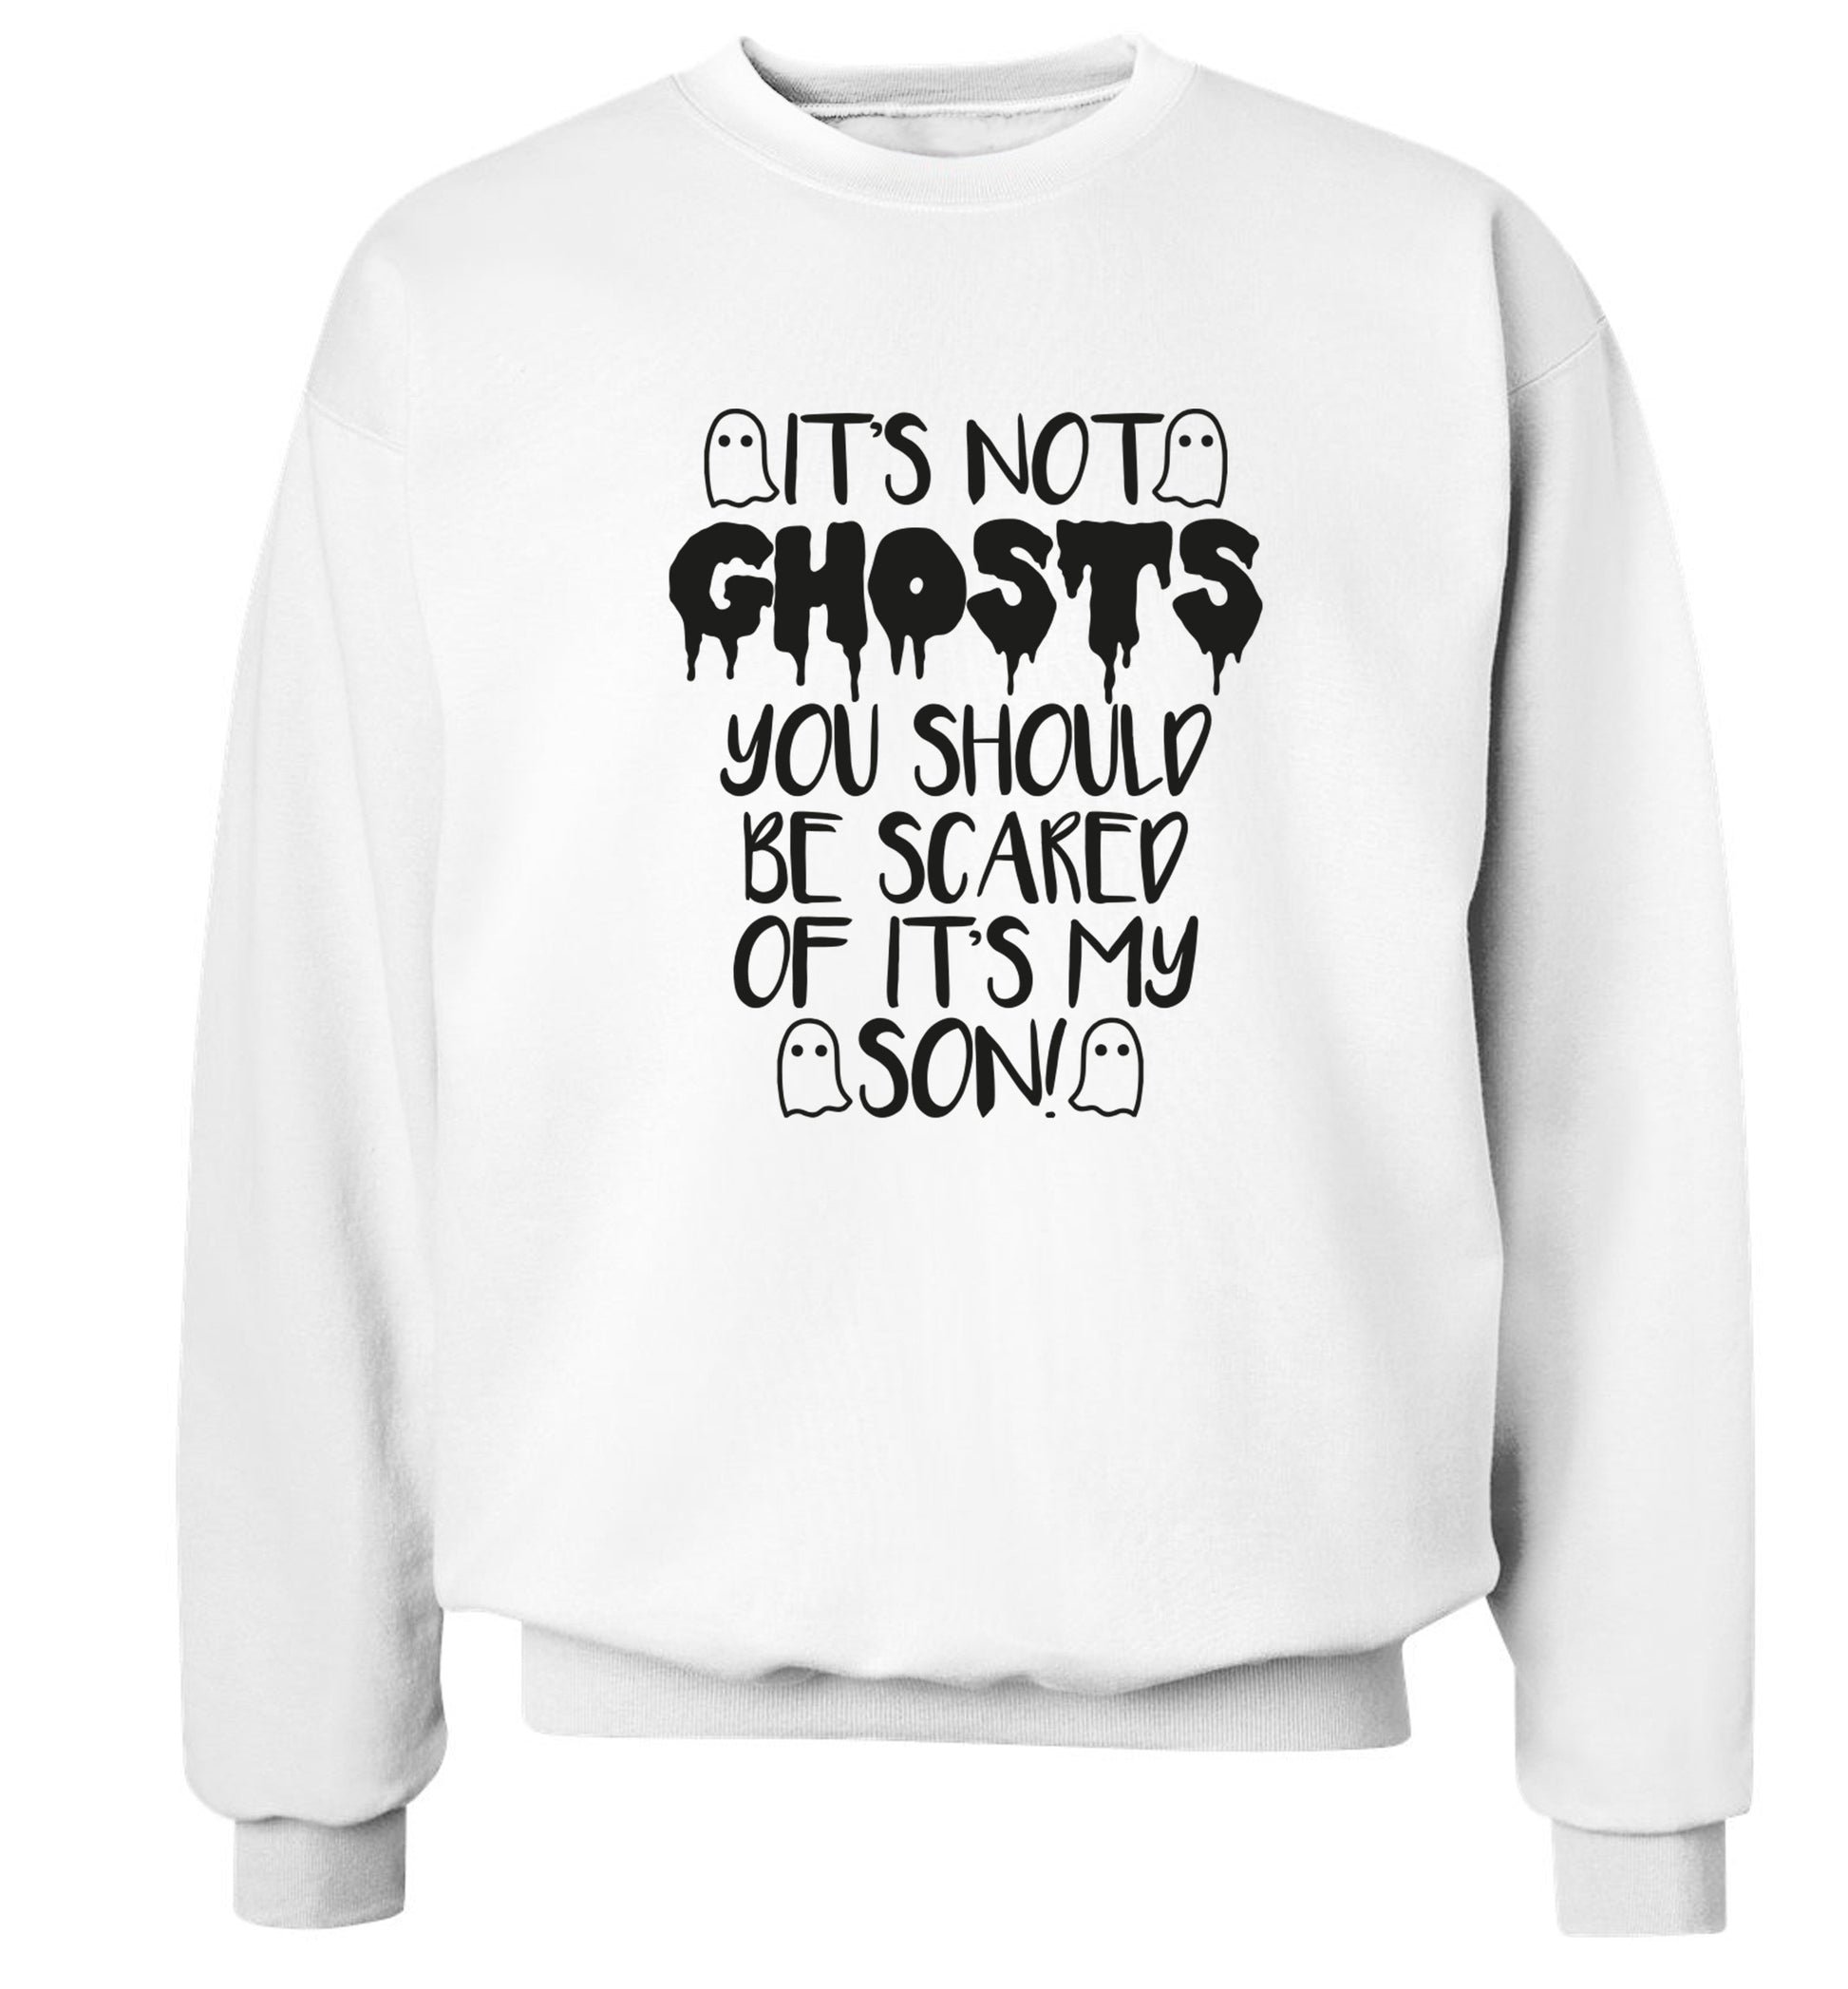 It's not ghosts you should be scared of it's my son! Adult's unisex white Sweater 2XL